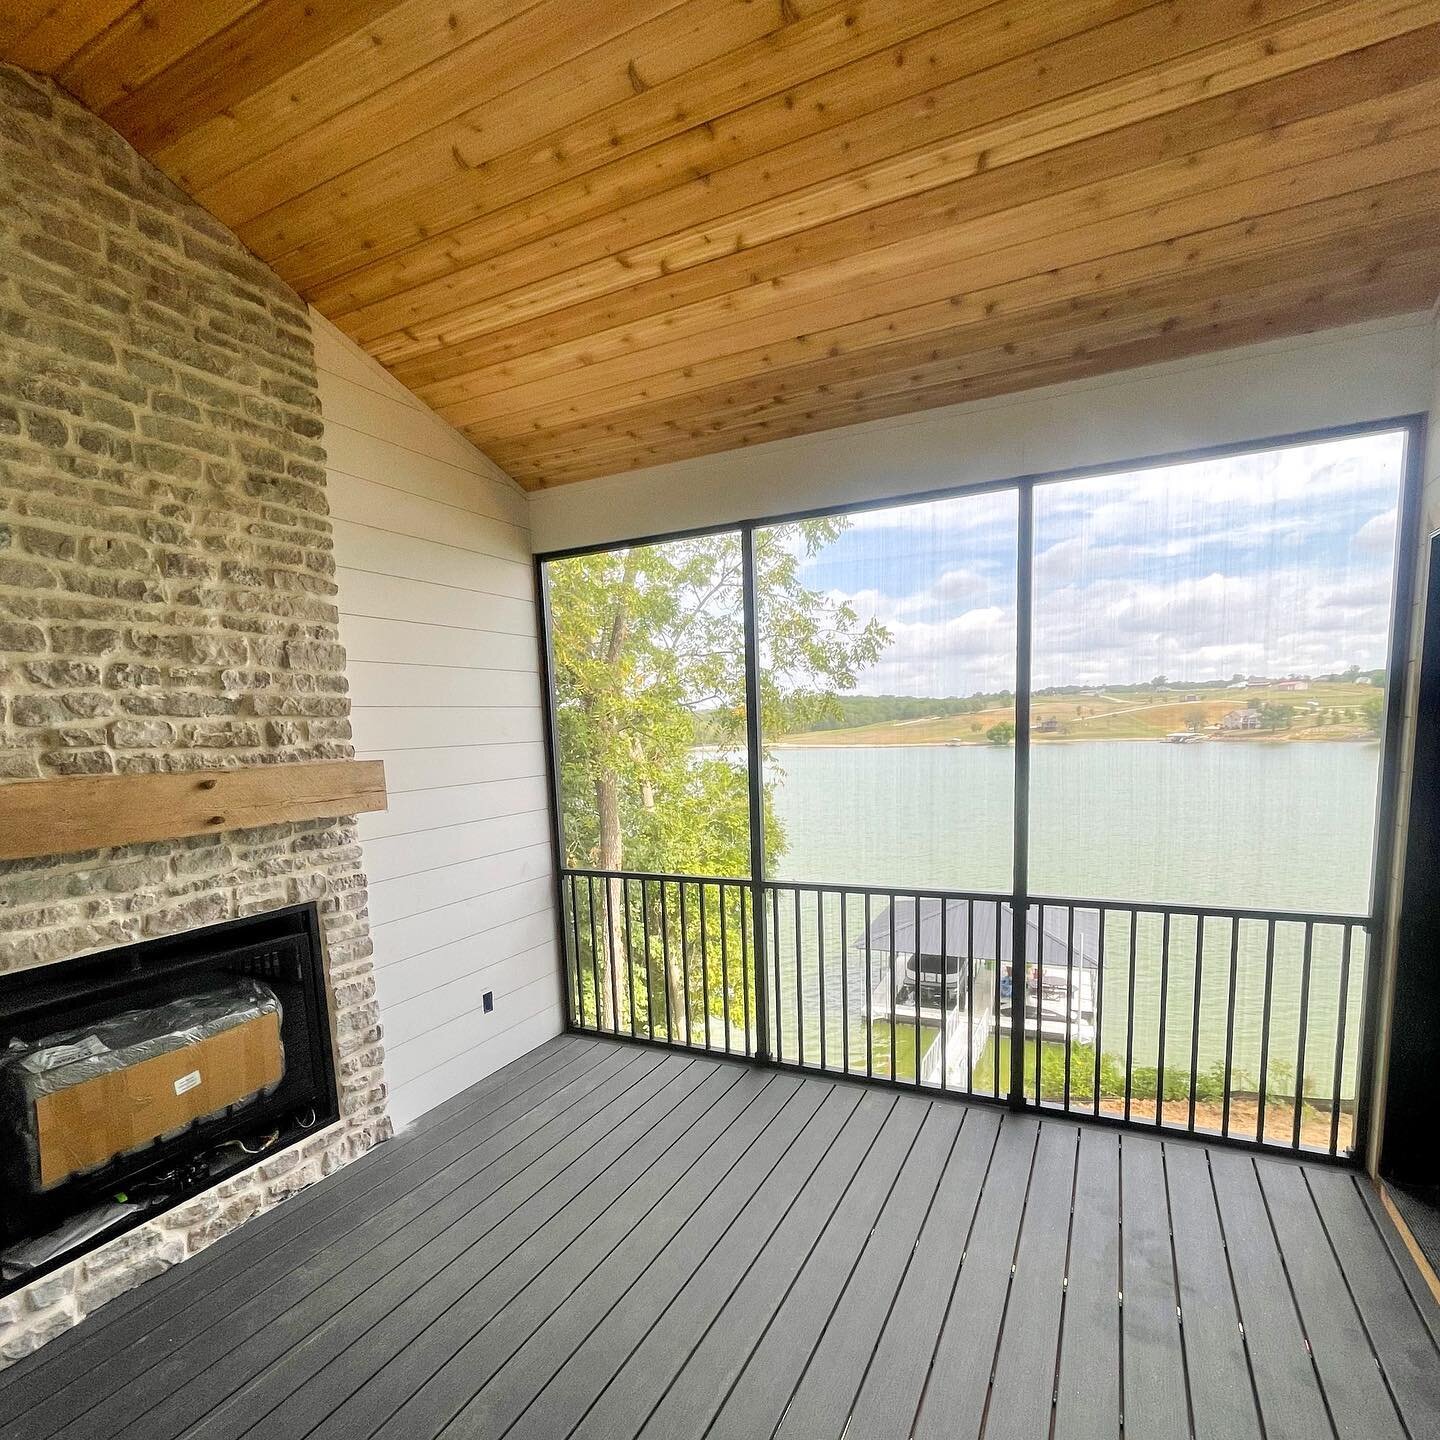 We traveled to beautiful Lake Sundown in Moravia, Iowa last month for this screened porch project and the views did not disappoint!

✔️Trex decking
✔️ Shiplap Walls
✔️ Tongue and Groove cedar ceiling
✔️ Westbury Screen rail
✔️ Cedar Posts wrapped at 